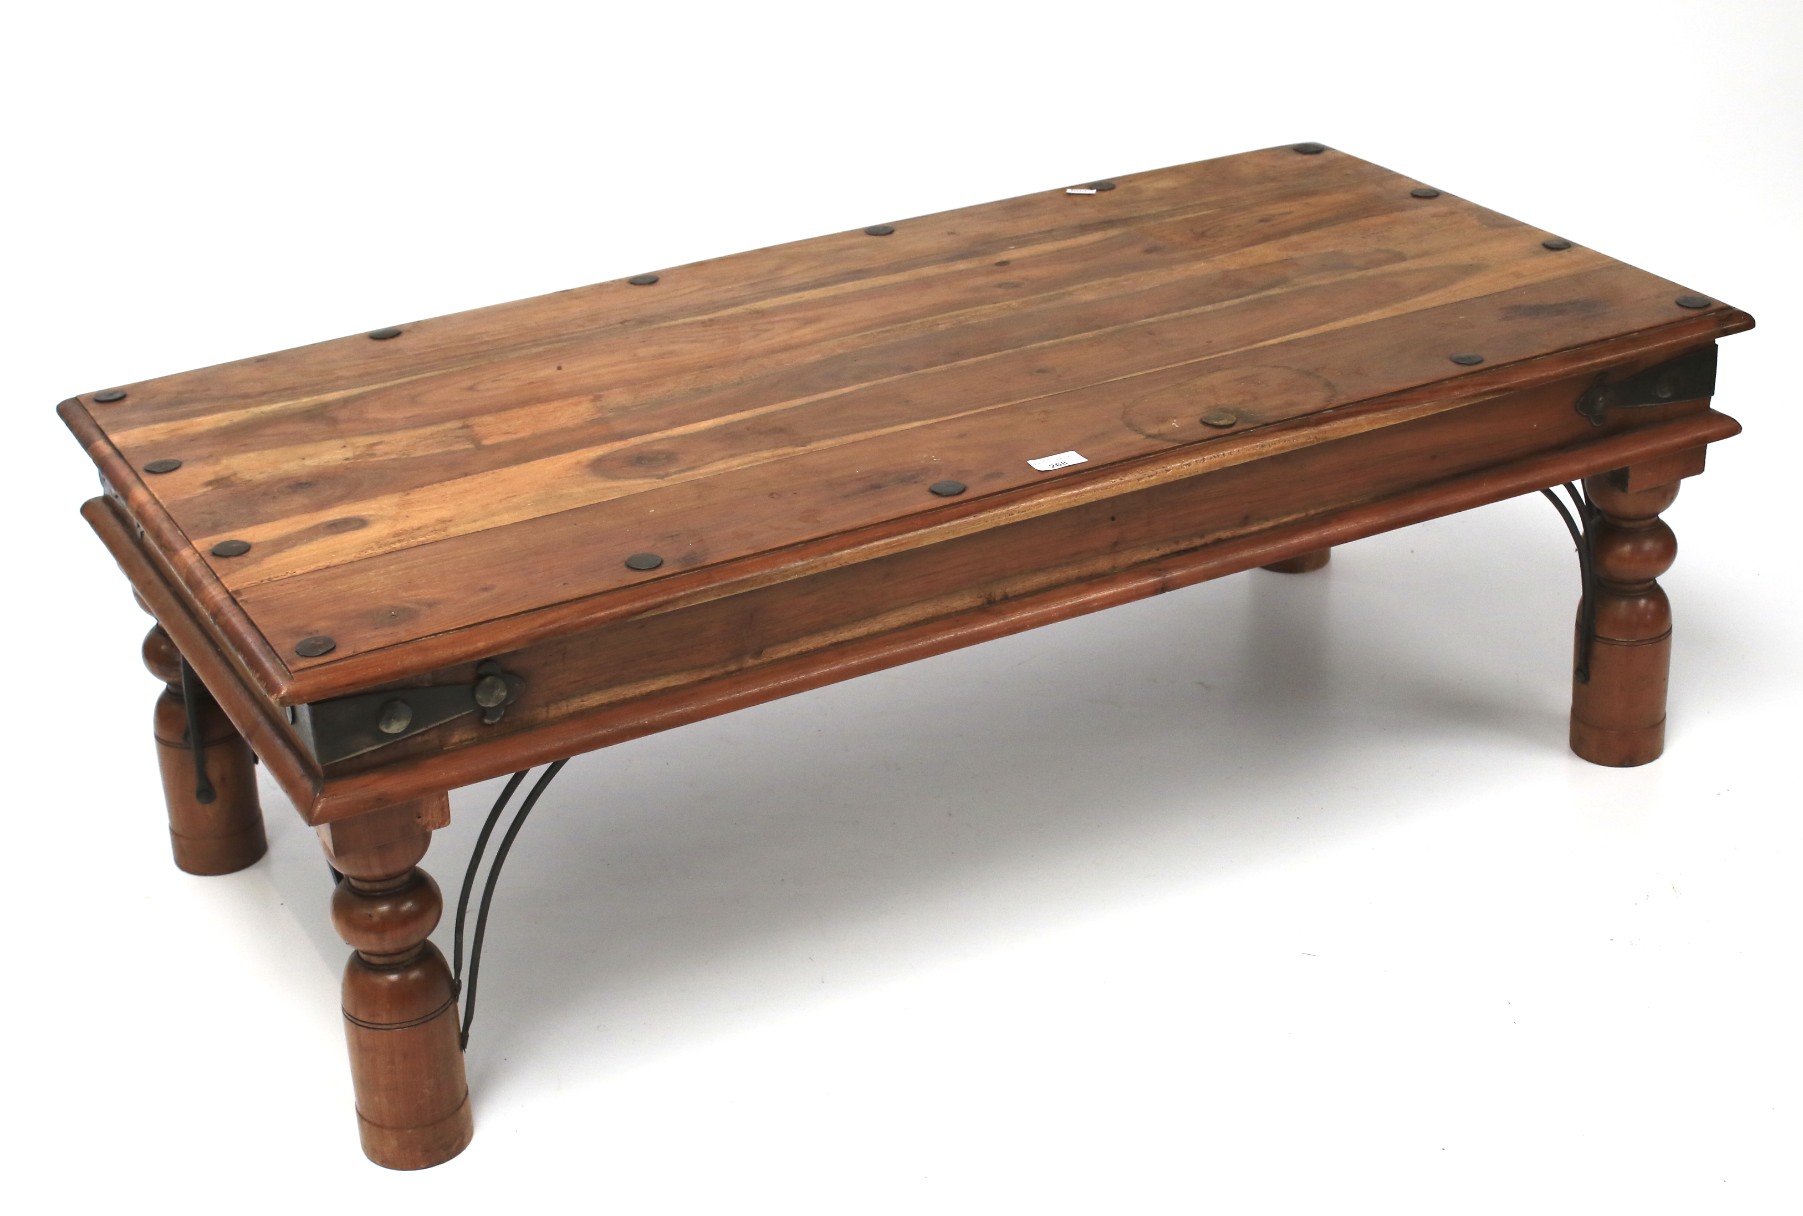 A contemporary hardwood coffee table.